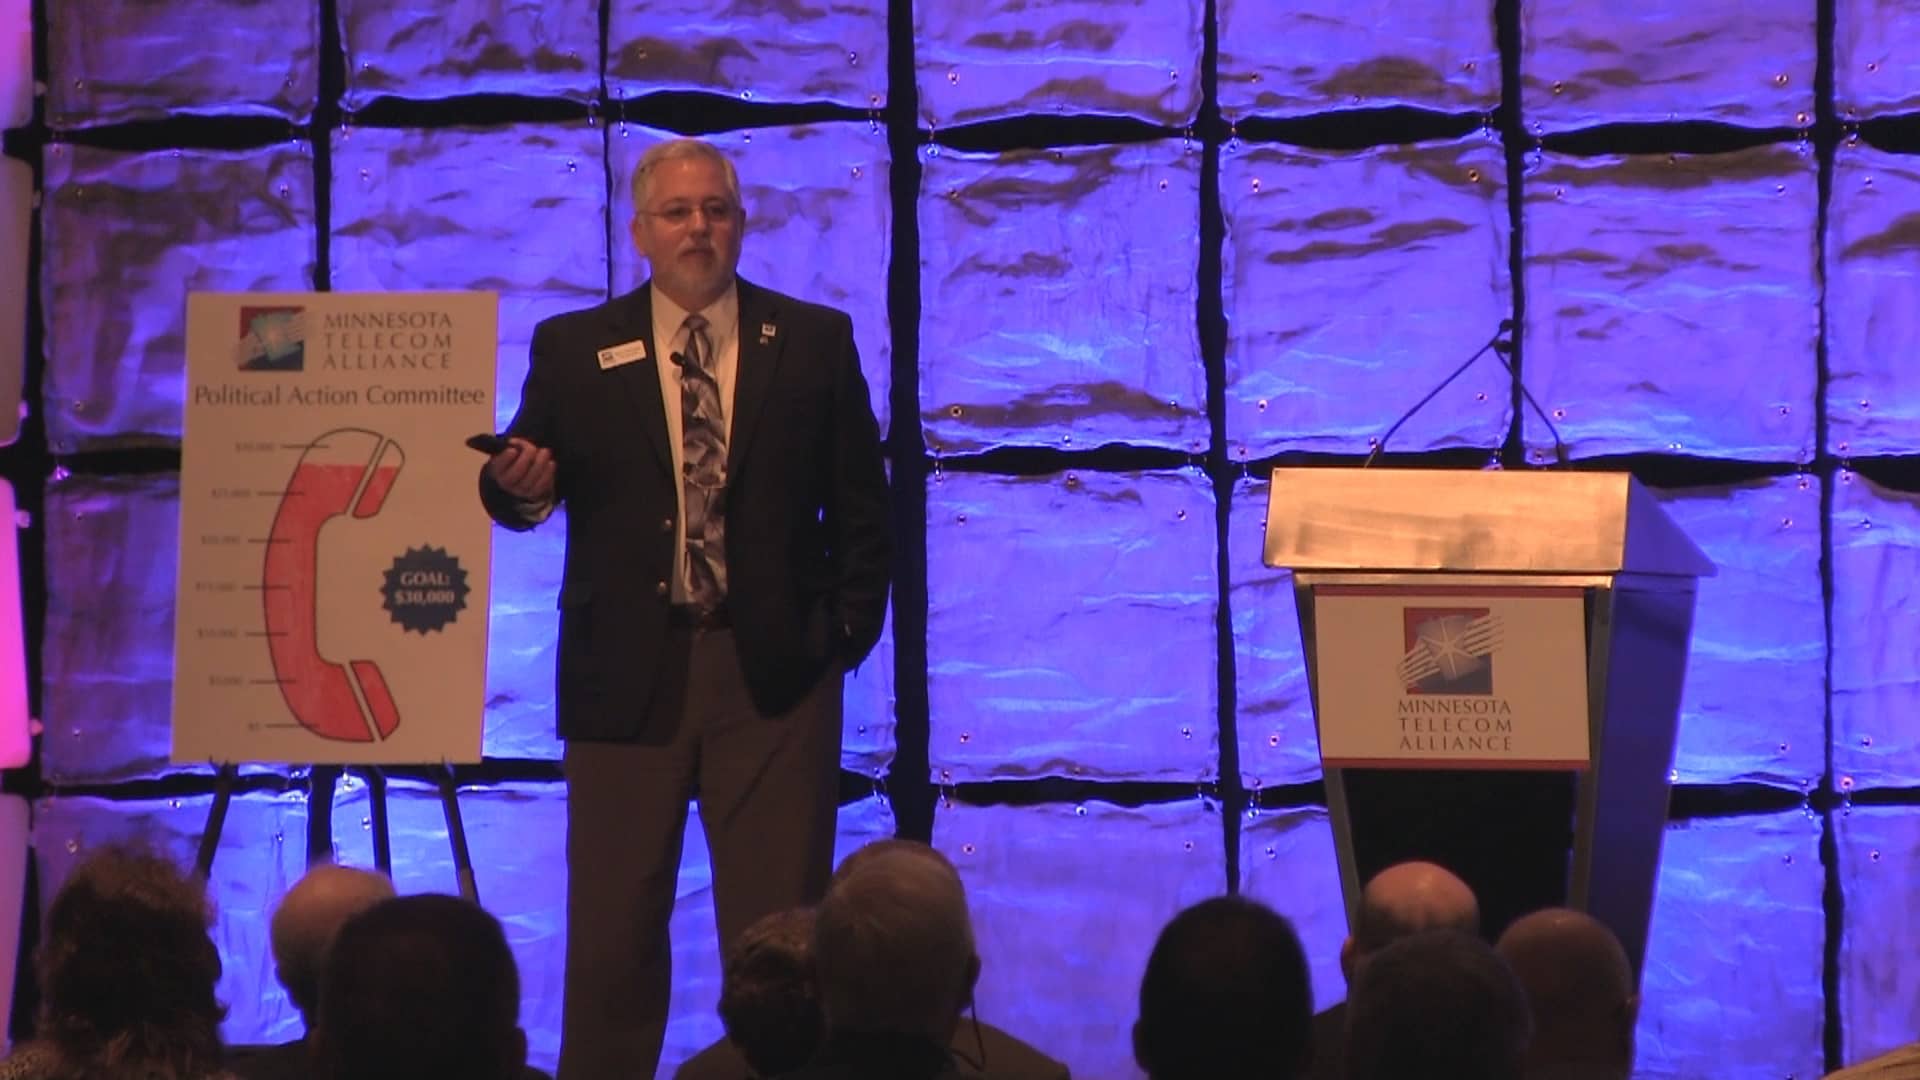 Brent Chrisetens on stage at the 2015 Annual Meeting